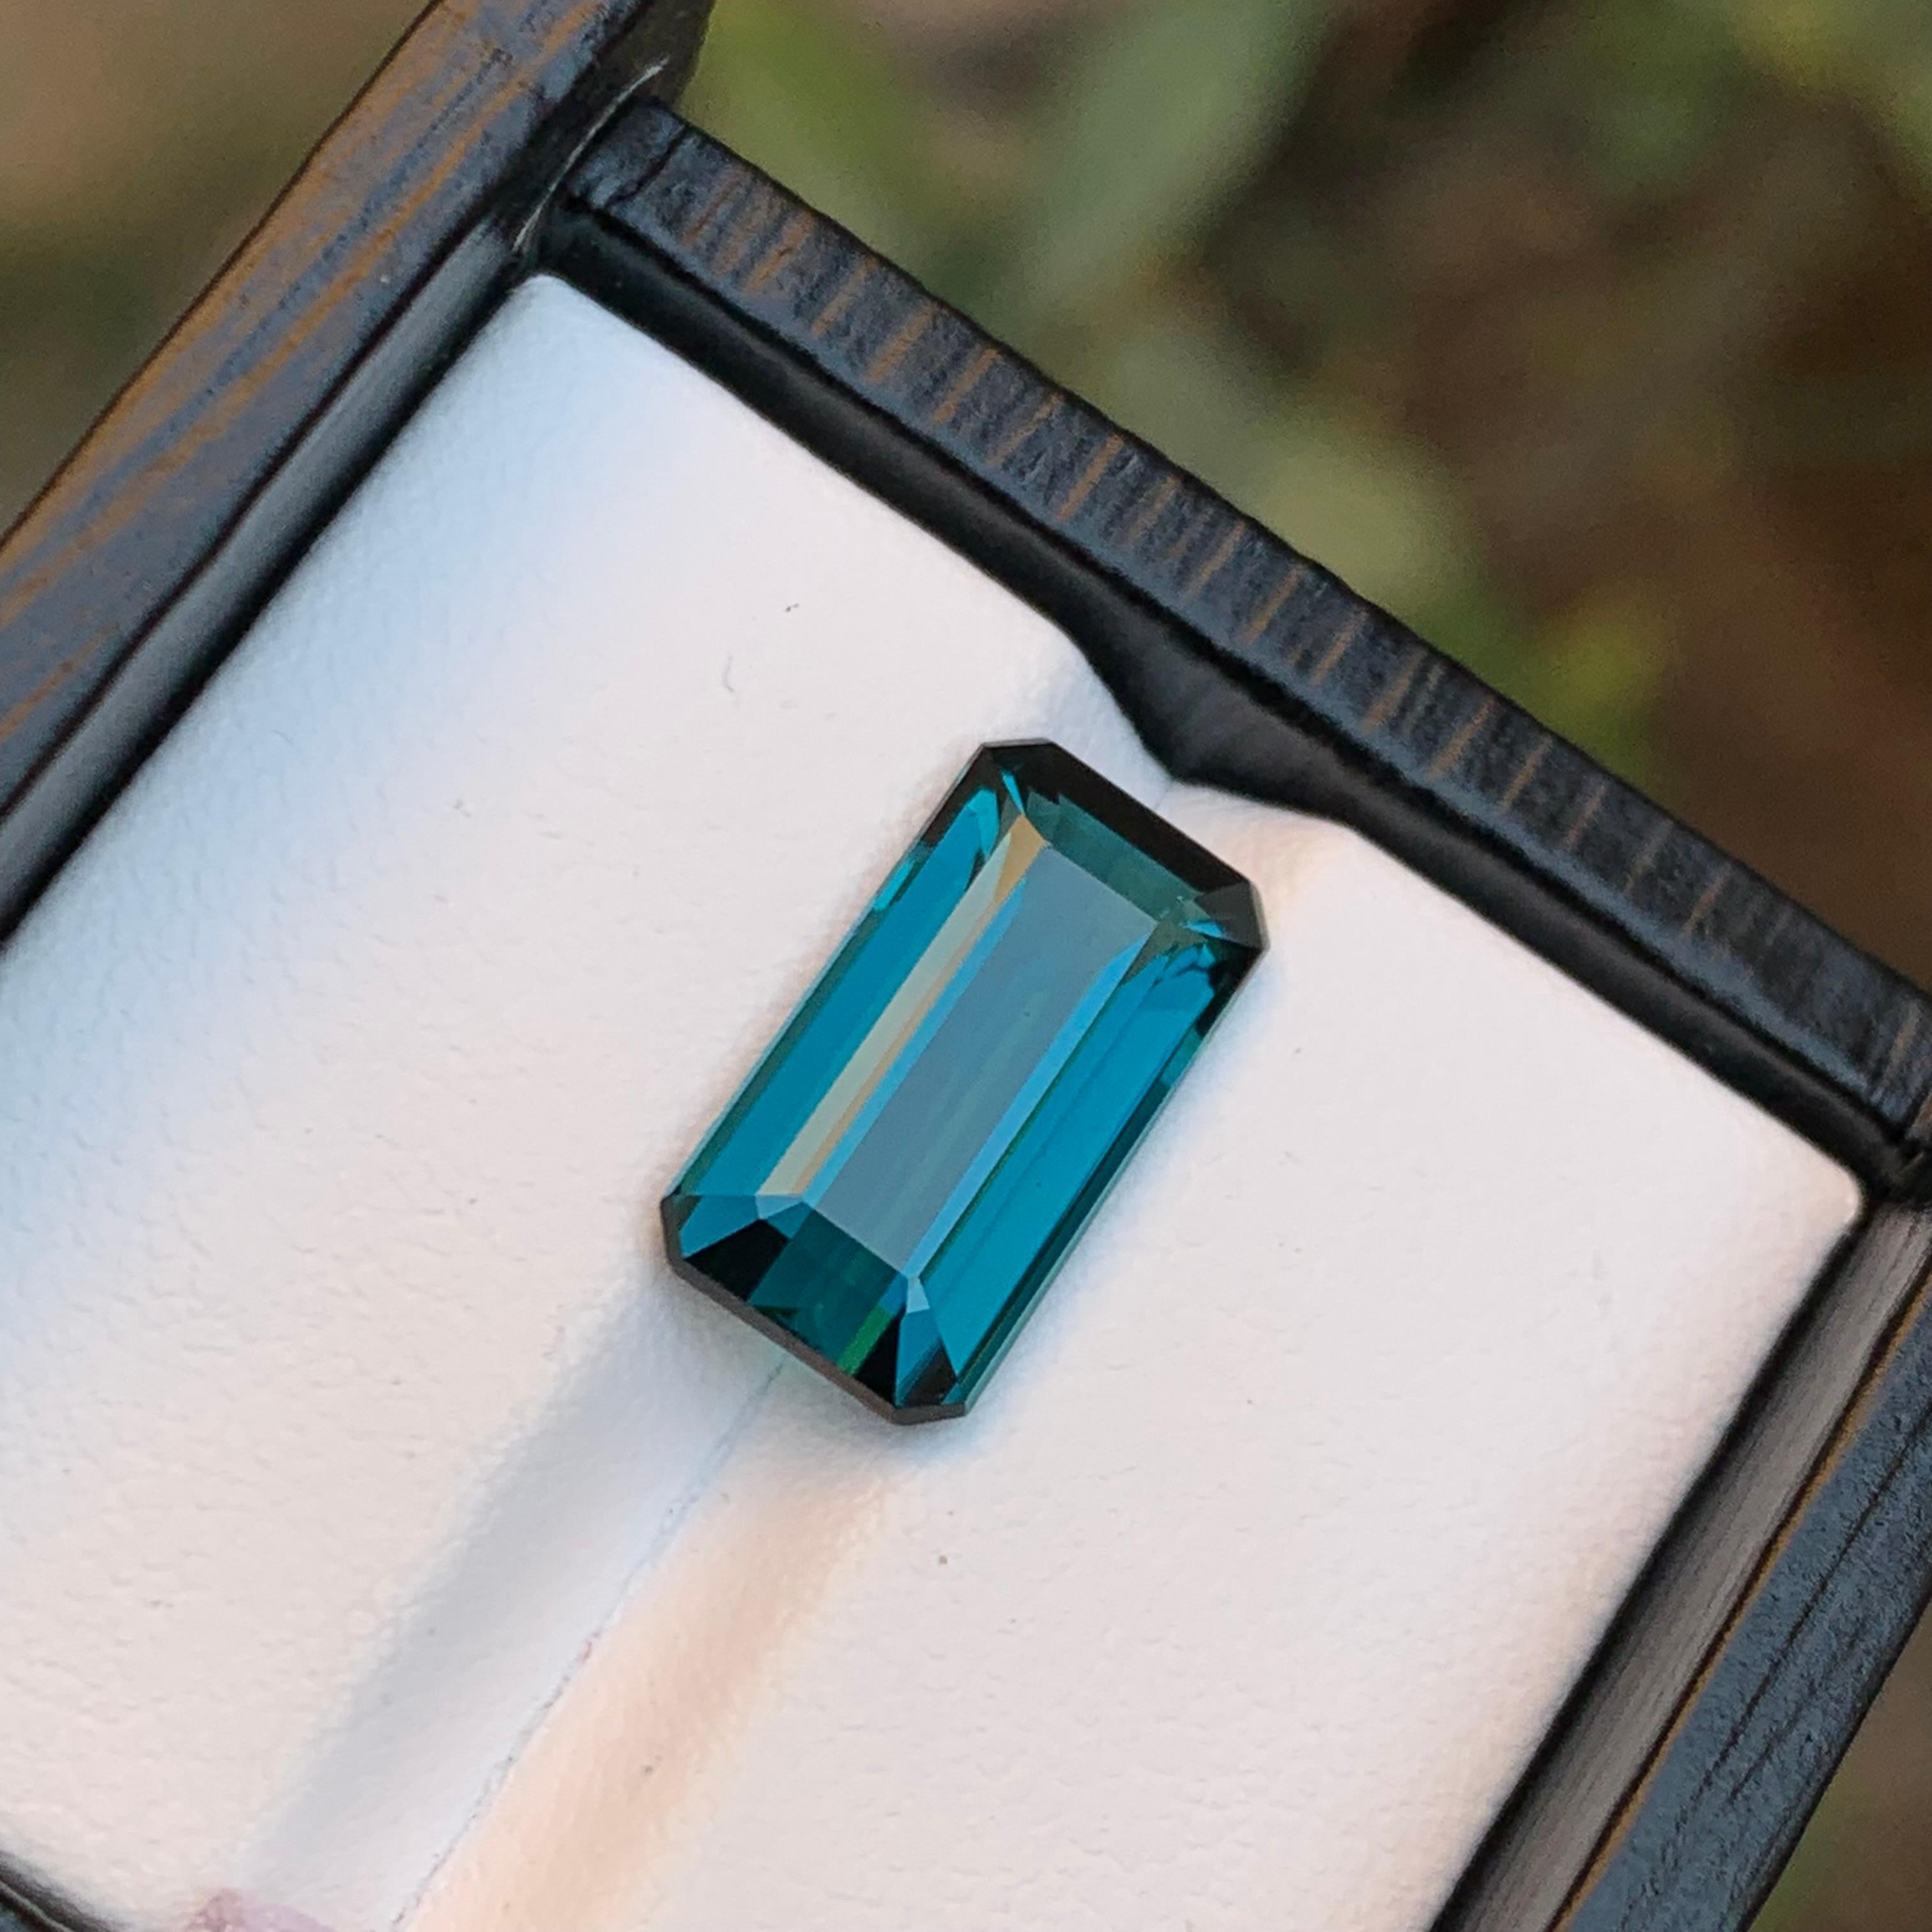 Rare Indicolite Blue Natural Tourmaline Gemstone, 5.20 Ct Emerald Cut for a Ring For Sale 4